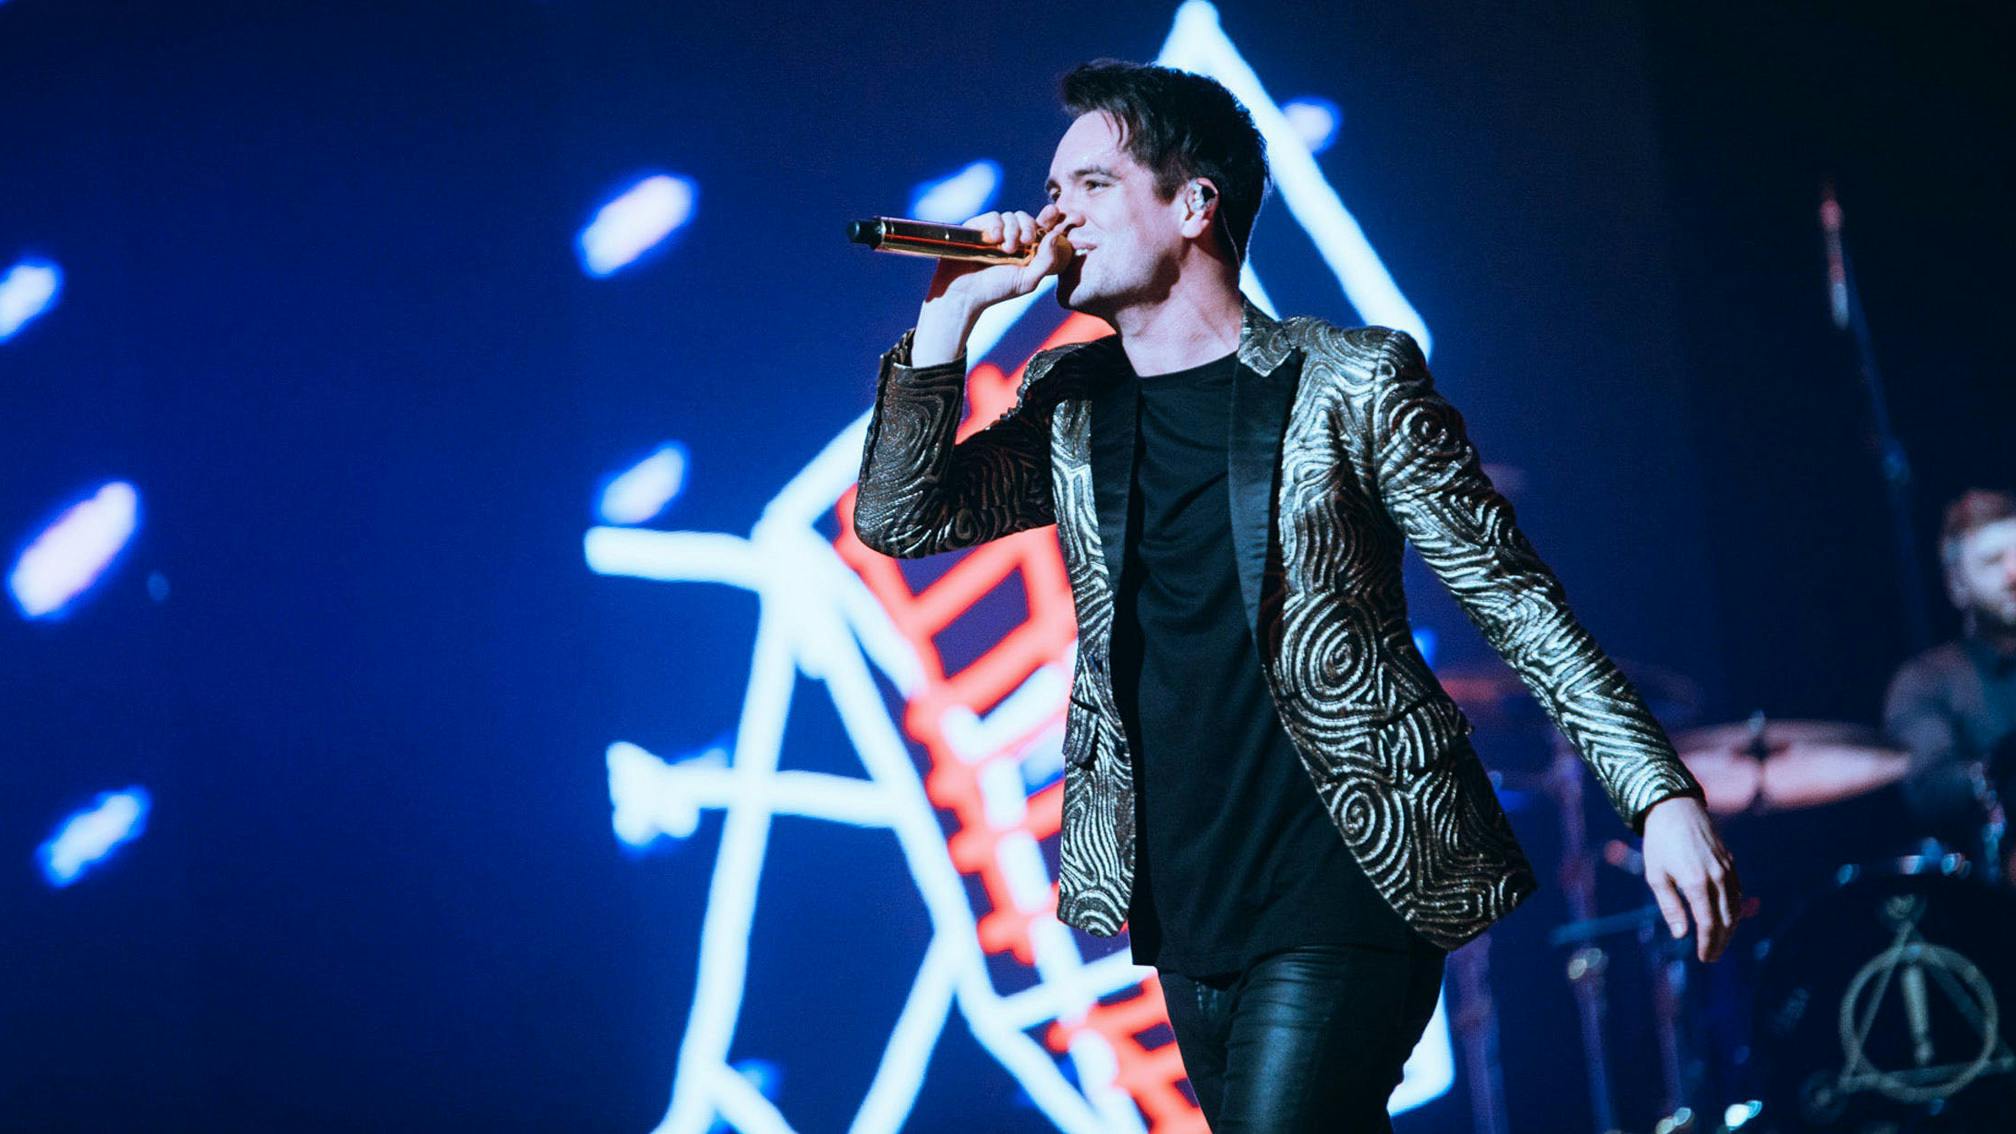 Panic! At The Disco's Brendon Urie Tells Trump To "Stop Playing My Song" At Rallies